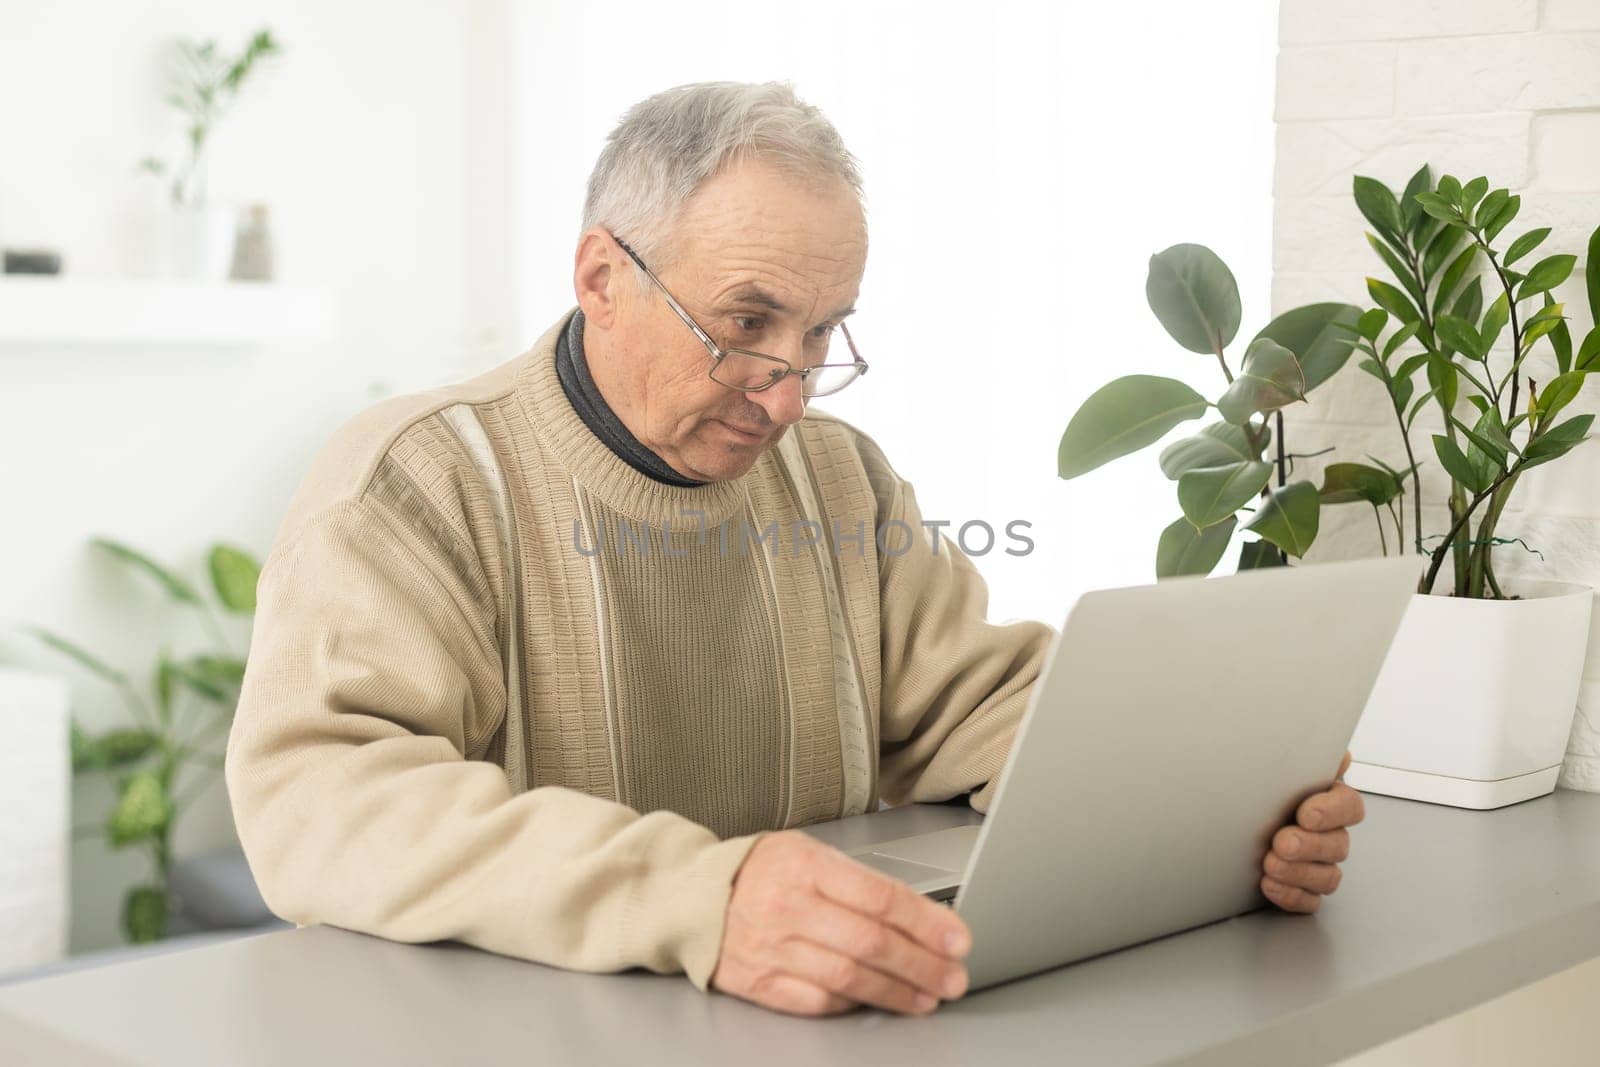 Senior man with eyeglasses connected with laptop at home